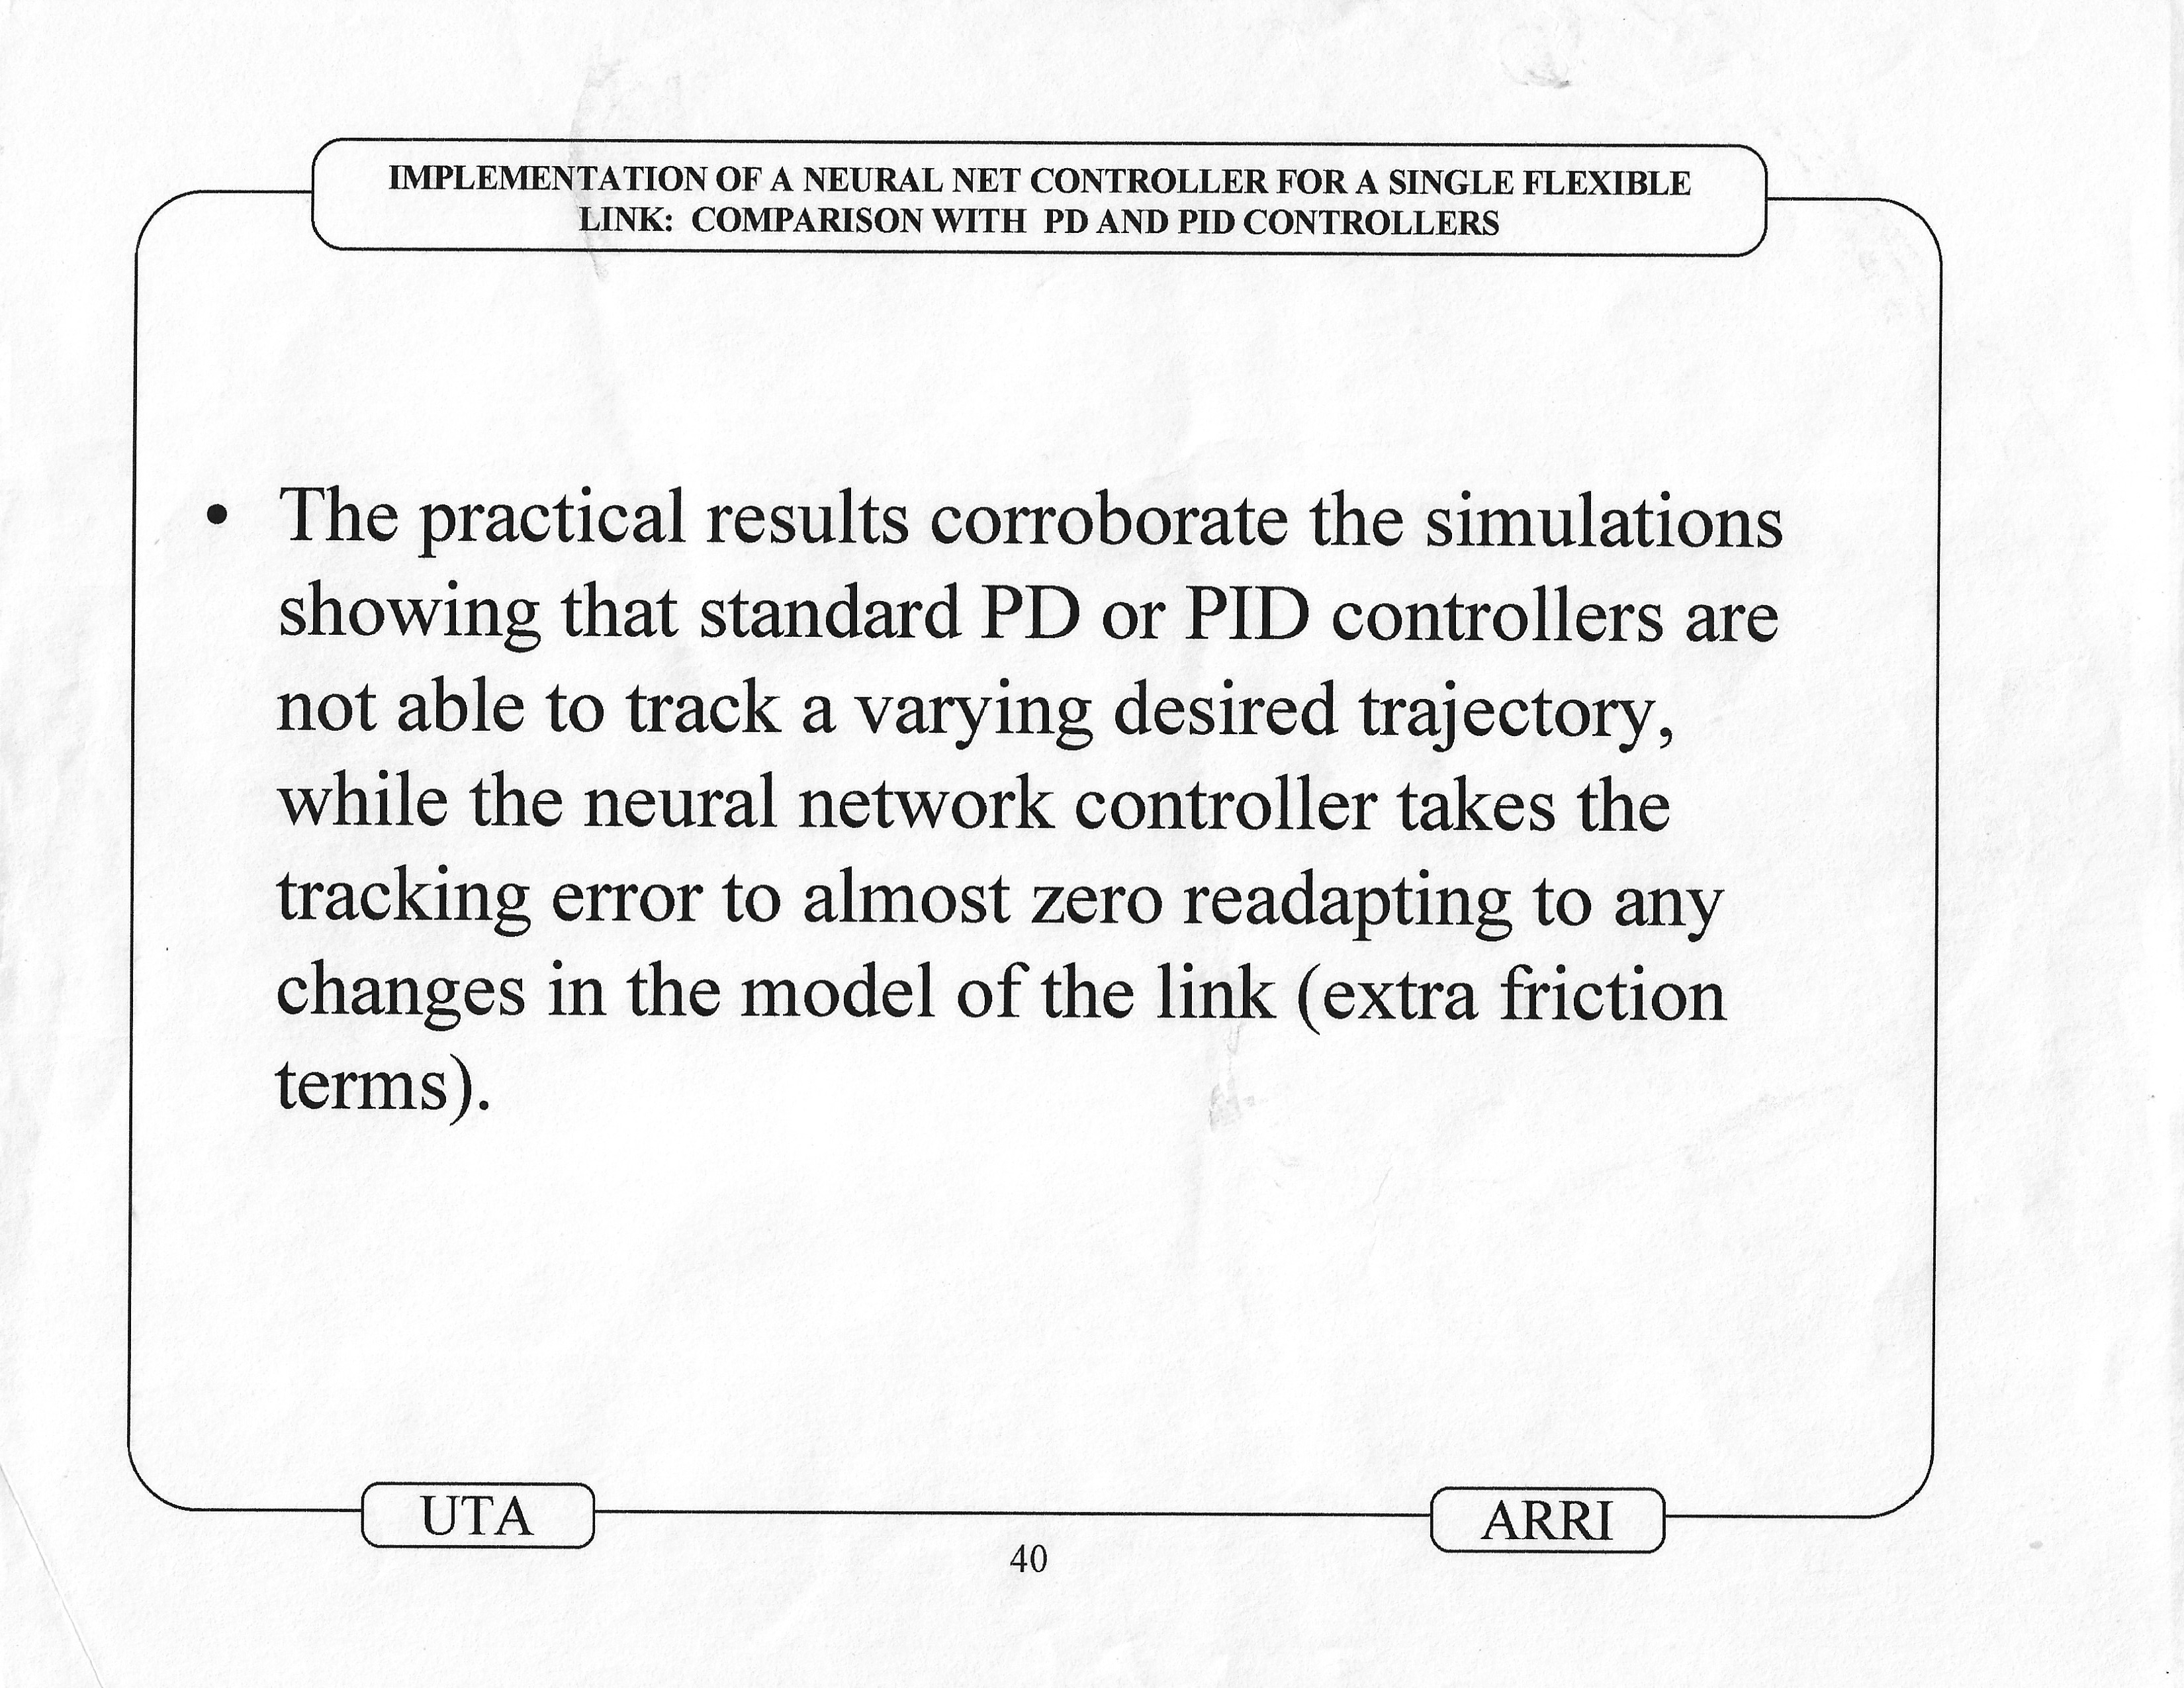 960724_Gutierrez_1996_Implementation_of_a_Neural_Net_Tracking_Controller_for_a_Single_Flexible_Link_Comparison_with_PD_and_PID_controllers_presentation_45